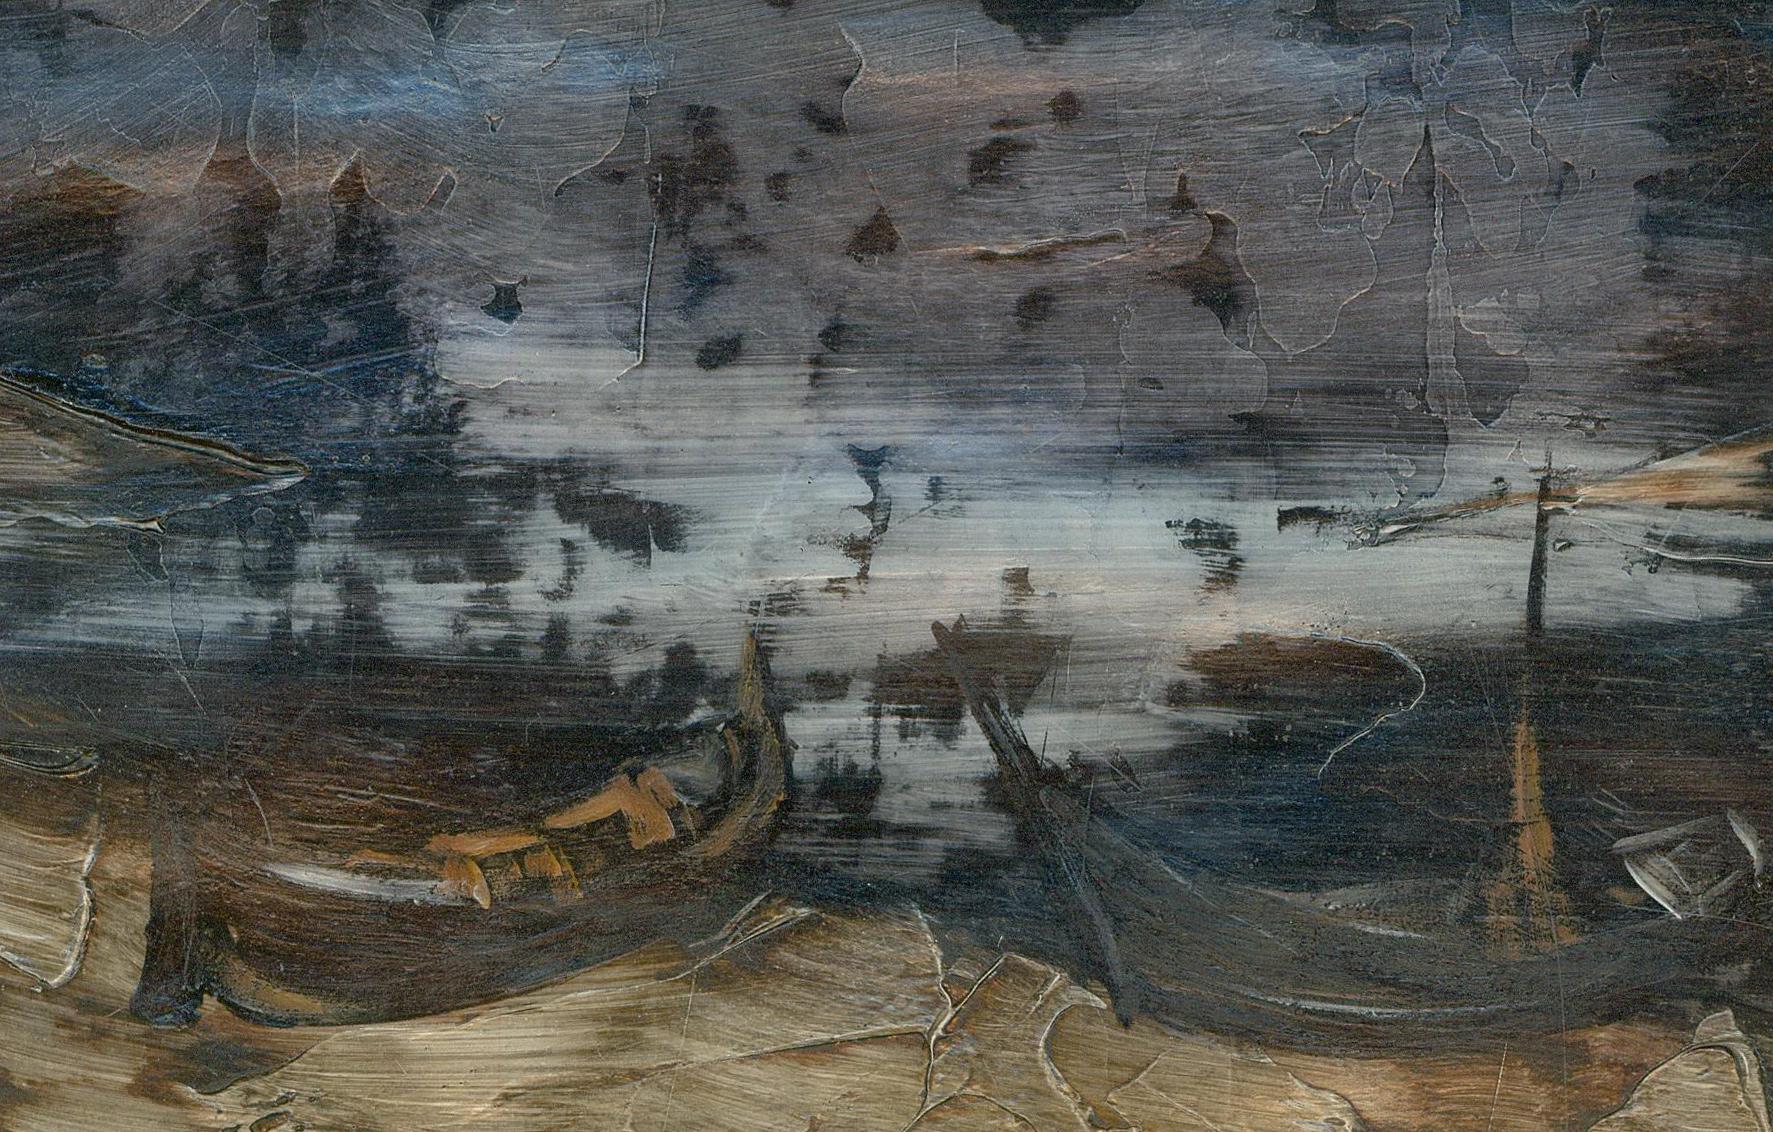 Thin and directional layers of oil paint are scraped, dragged and smudged across an uneven primer to create a sullen painting depicting two boats ashore a cold beach in front of a vacant sea.

The painting evokes a harrowing honesty, and through